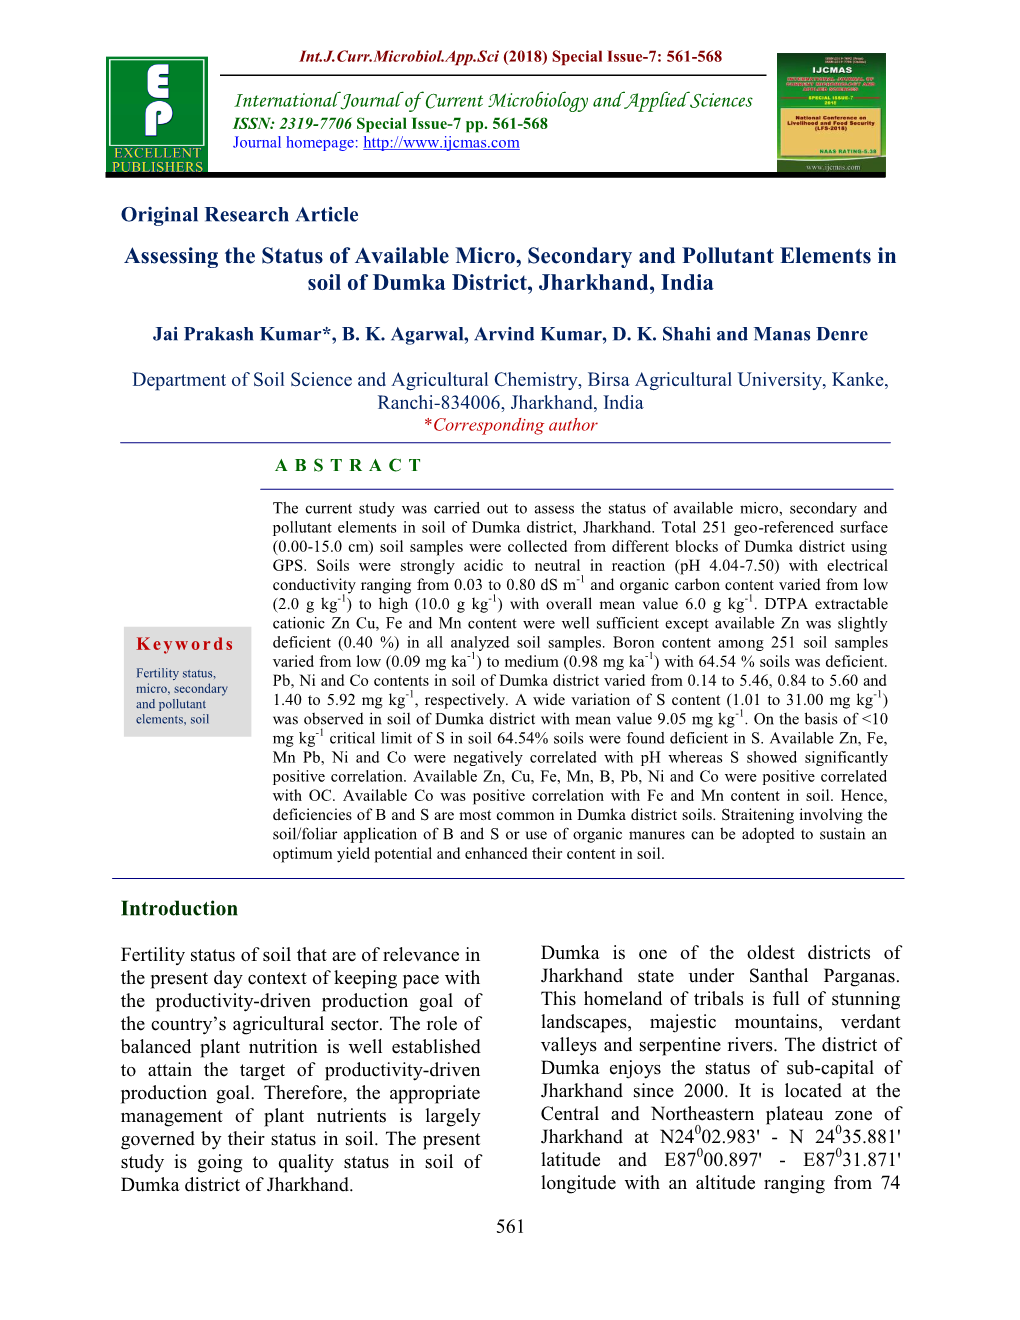 Assessing the Status of Available Micro, Secondary and Pollutant Elements in Soil of Dumka District, Jharkhand, India